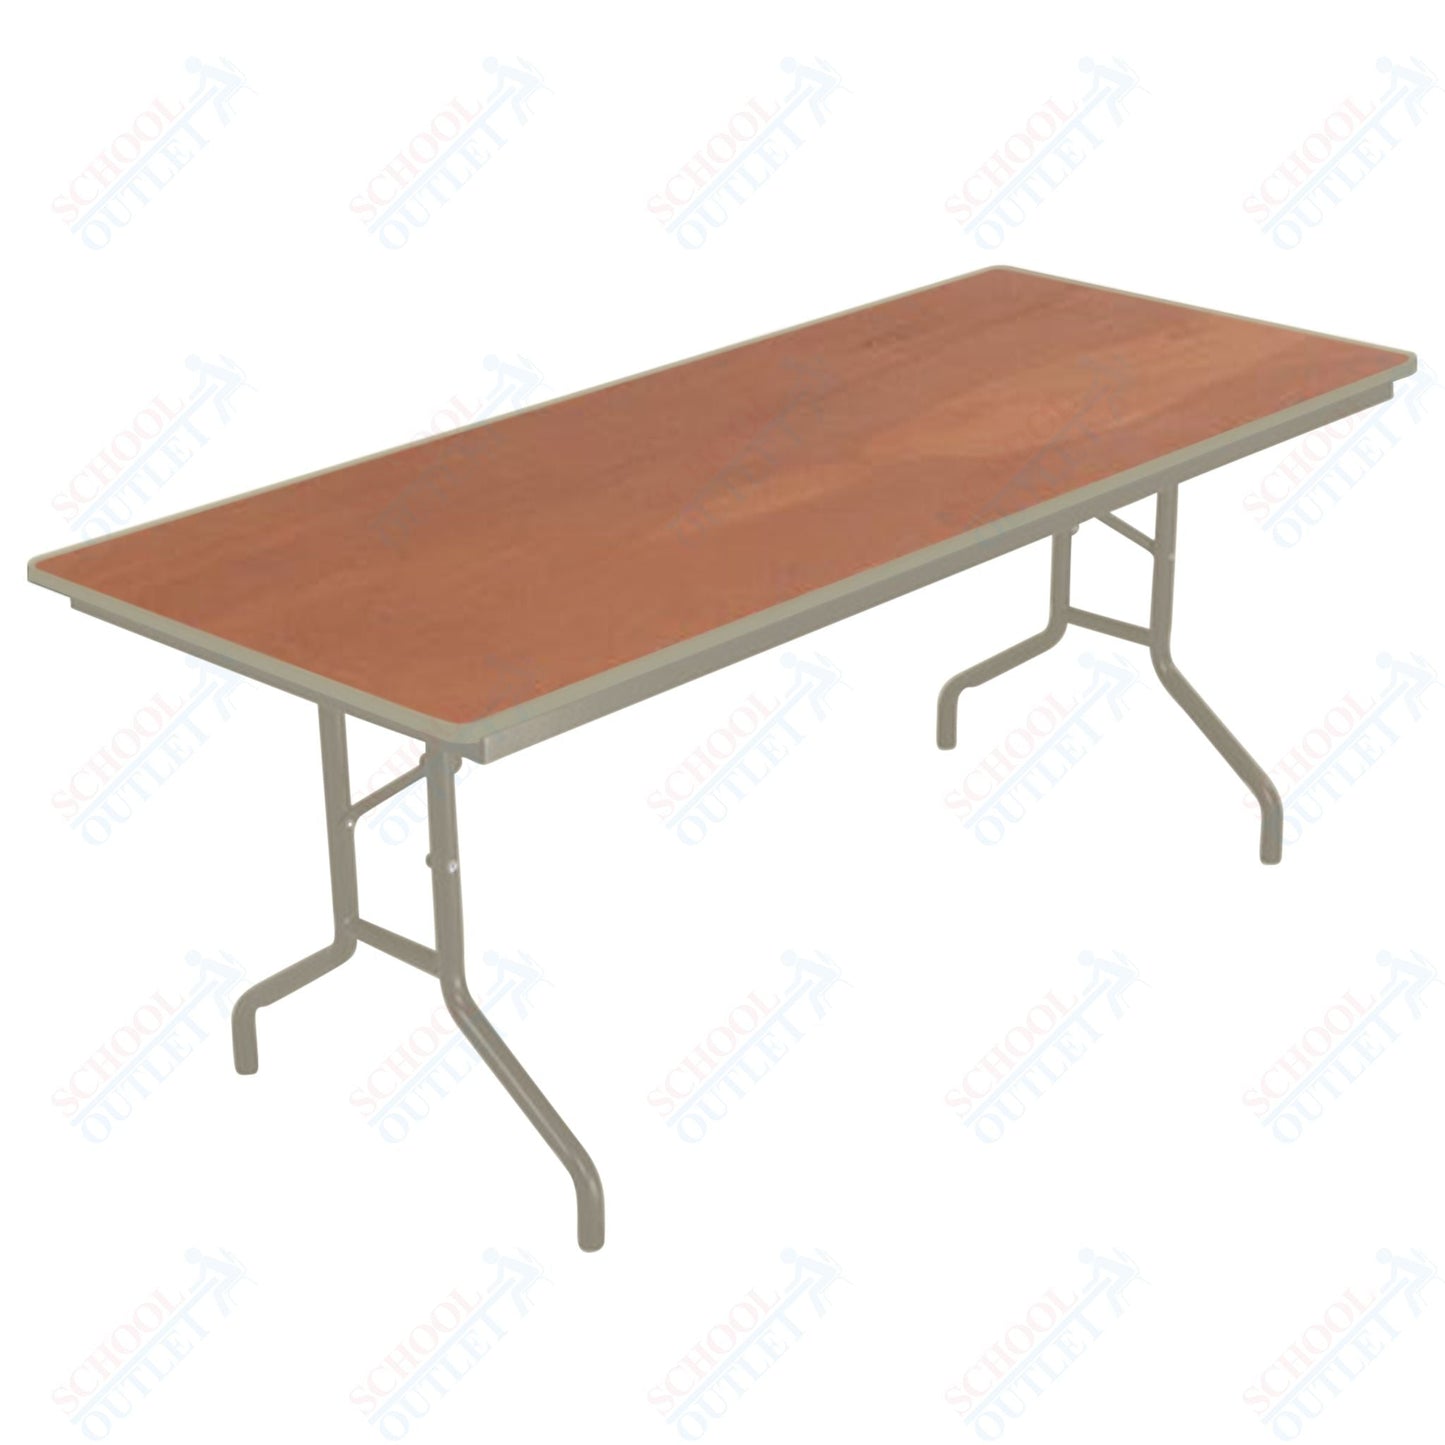 AmTab Folding Table - Plywood Stained and Sealed - Vinyl T-Molding Edge - 18"W x 60"L x 29"H (AmTab AMT-185PM) - SchoolOutlet